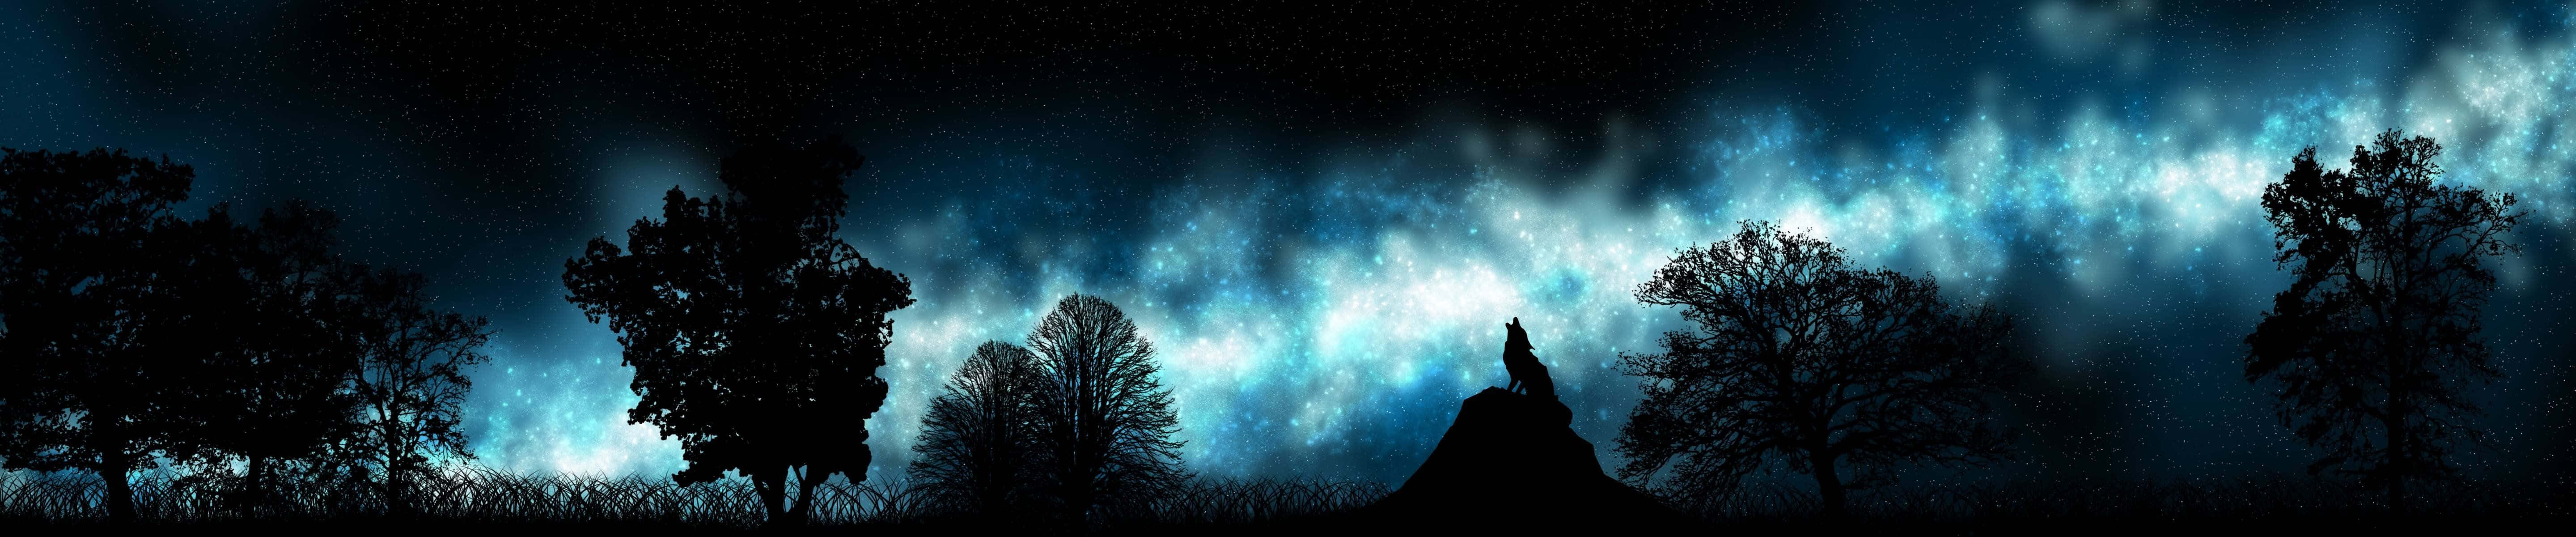 The Aurora Borealis Is Seen In The Sky Wallpaper